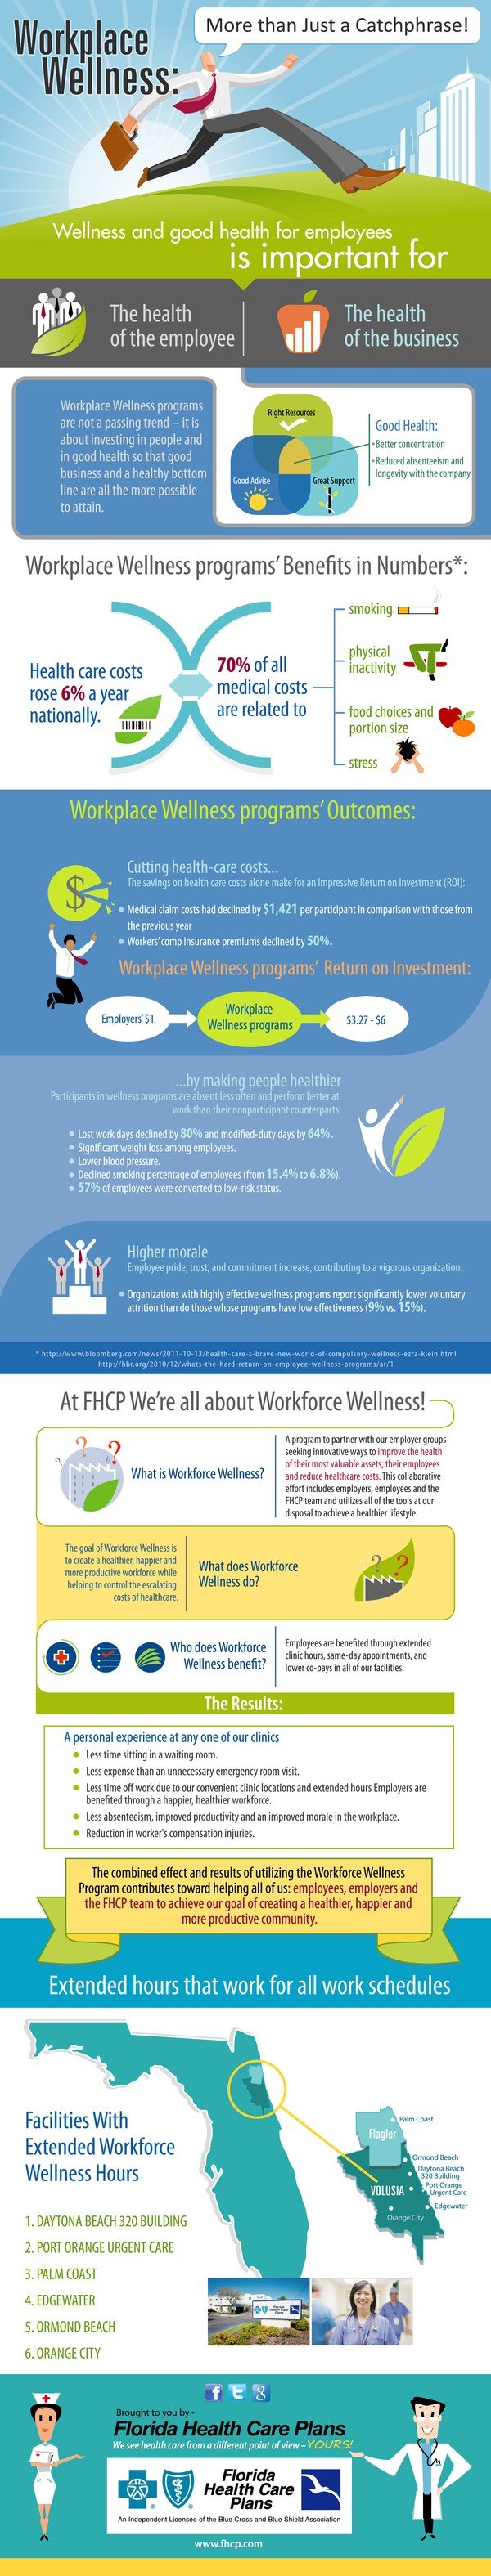 workplace wellness infographic